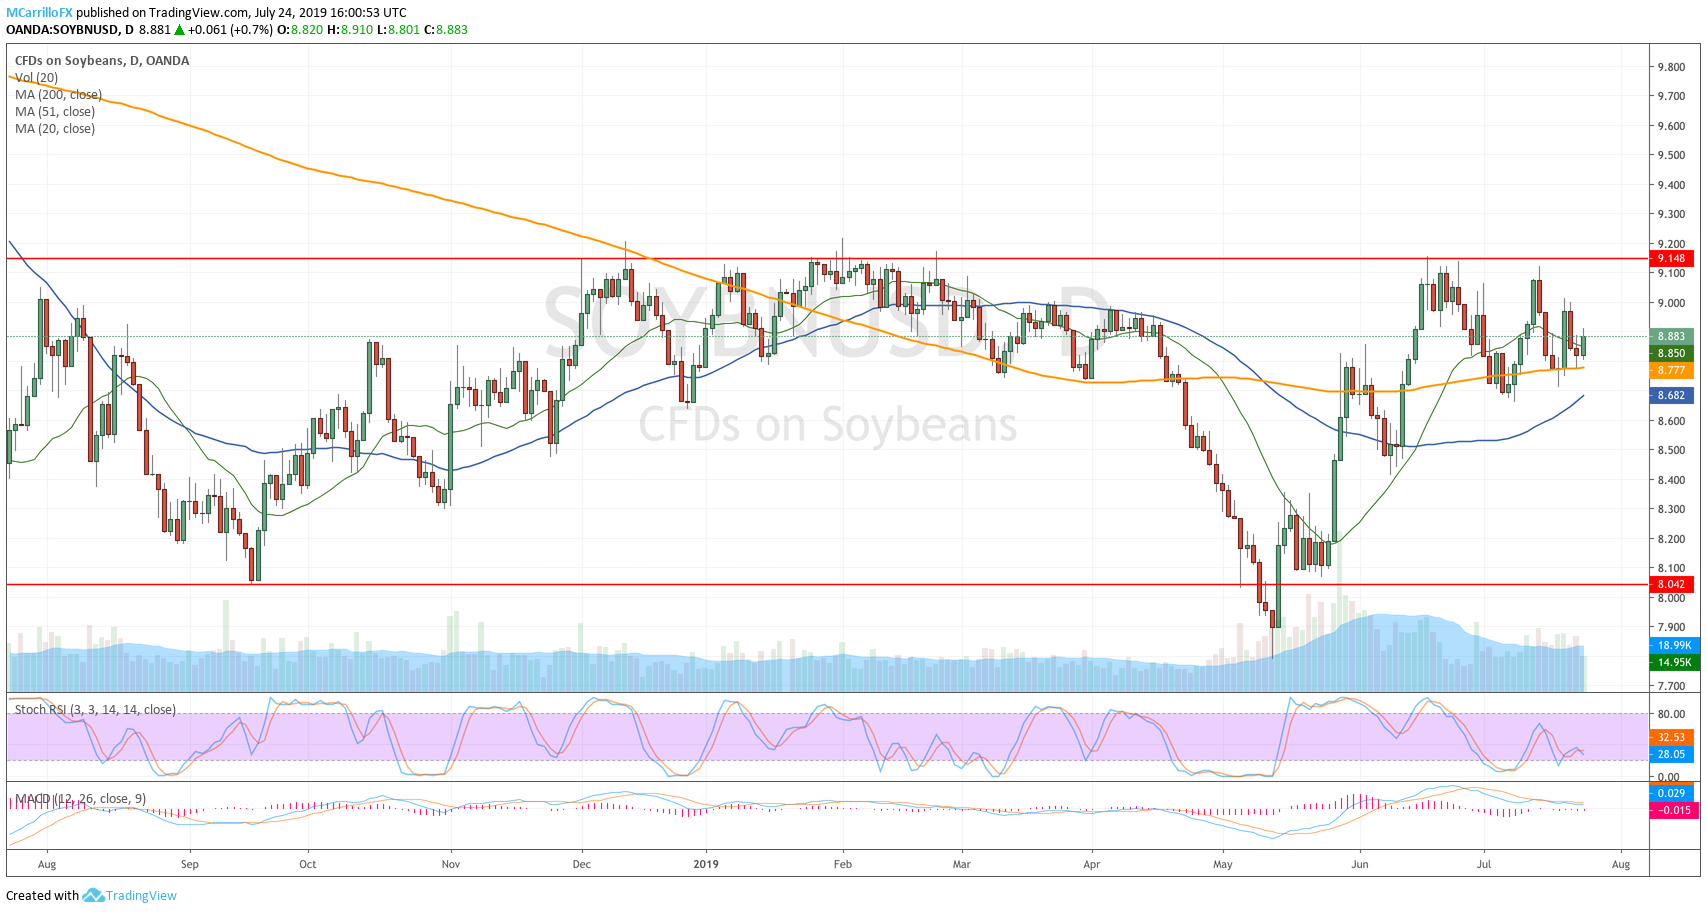 Prices of soybeans July 24 daily chart